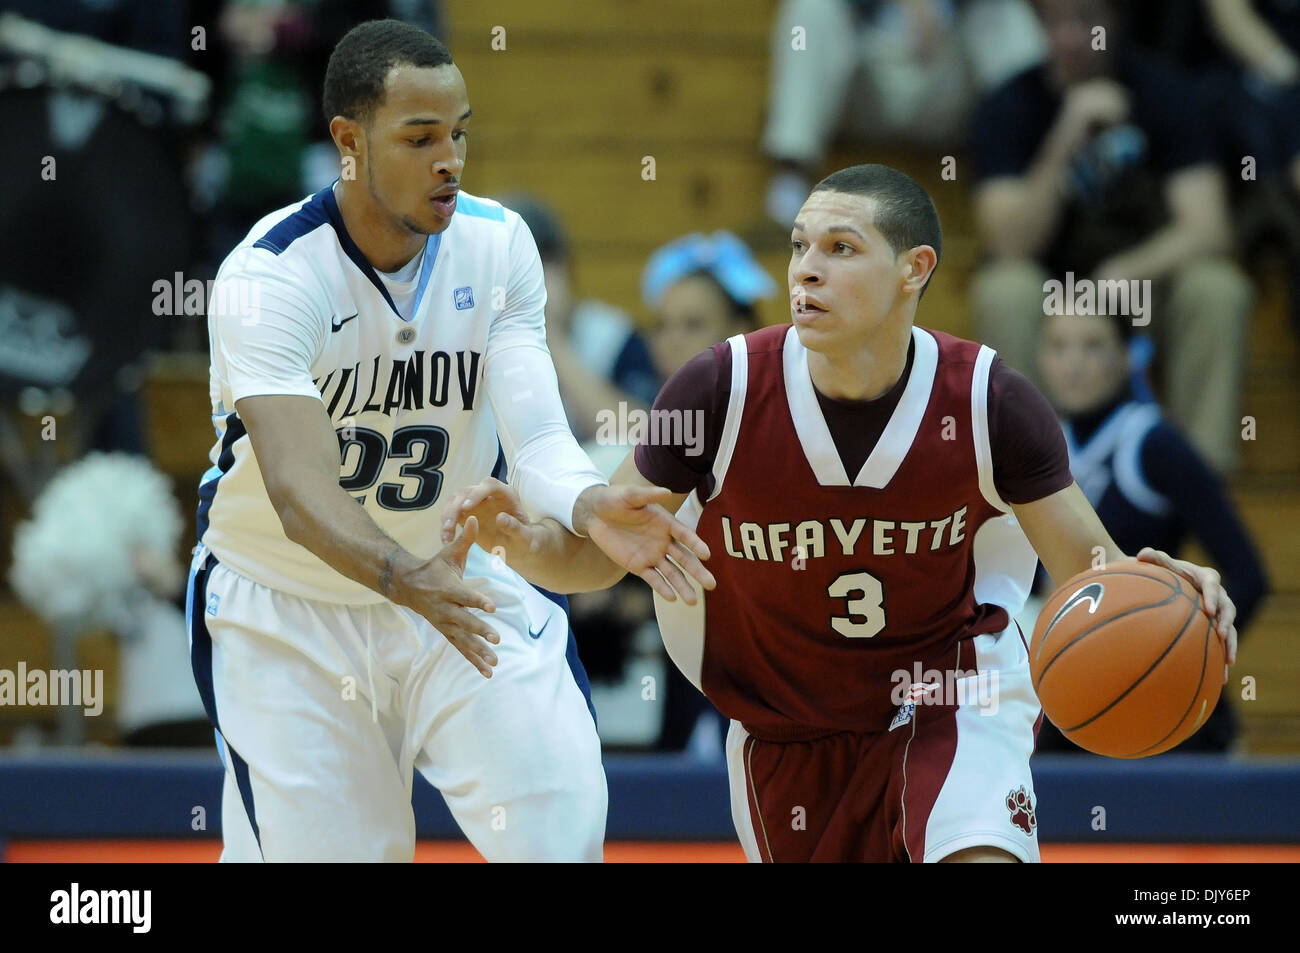 Nov. 20, 2010 - Villanova, Pennsylvania, United States of America - Lafayette Leopards guard Tony Johnson #3 with the ball being covered by Villanova Wildcats guard Dominic Cheek #23. Villanova defeated Lafayette 86-41, in a game being played at The Pavillion  in Villanova, Pennsylvania (Credit Image: © Mike McAtee/Southcreek Global/ZUMAPRESS.com) Stock Photo